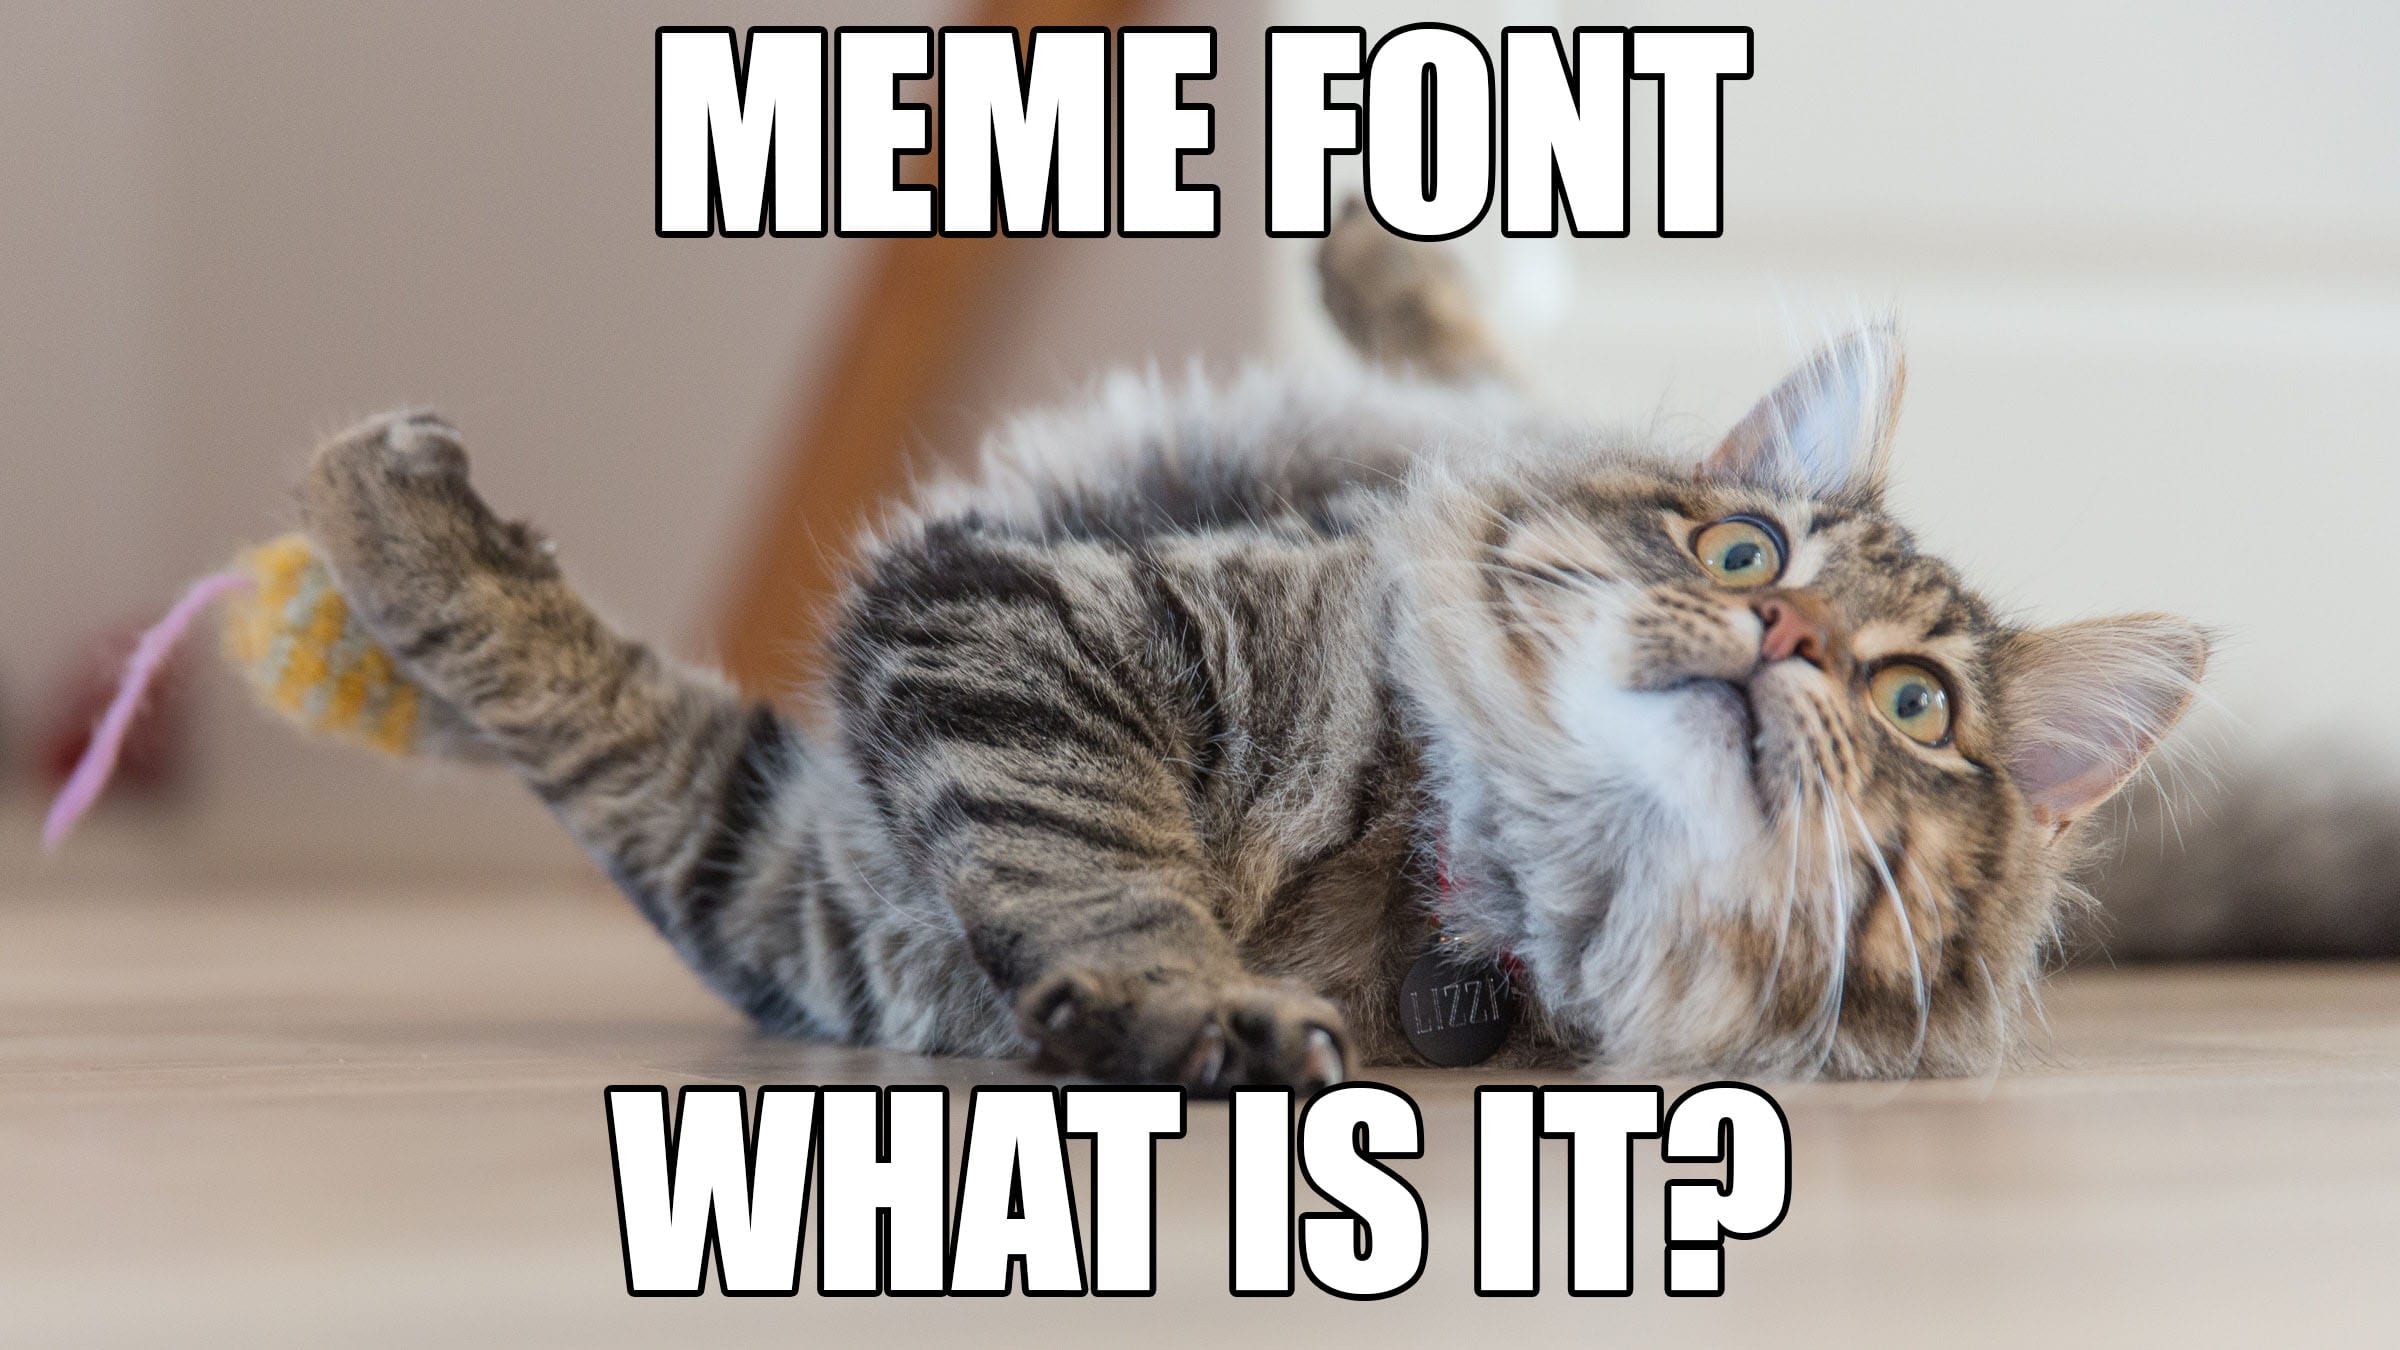 meme-font-what-is-it-and-why-do-we-use-it-london-grey